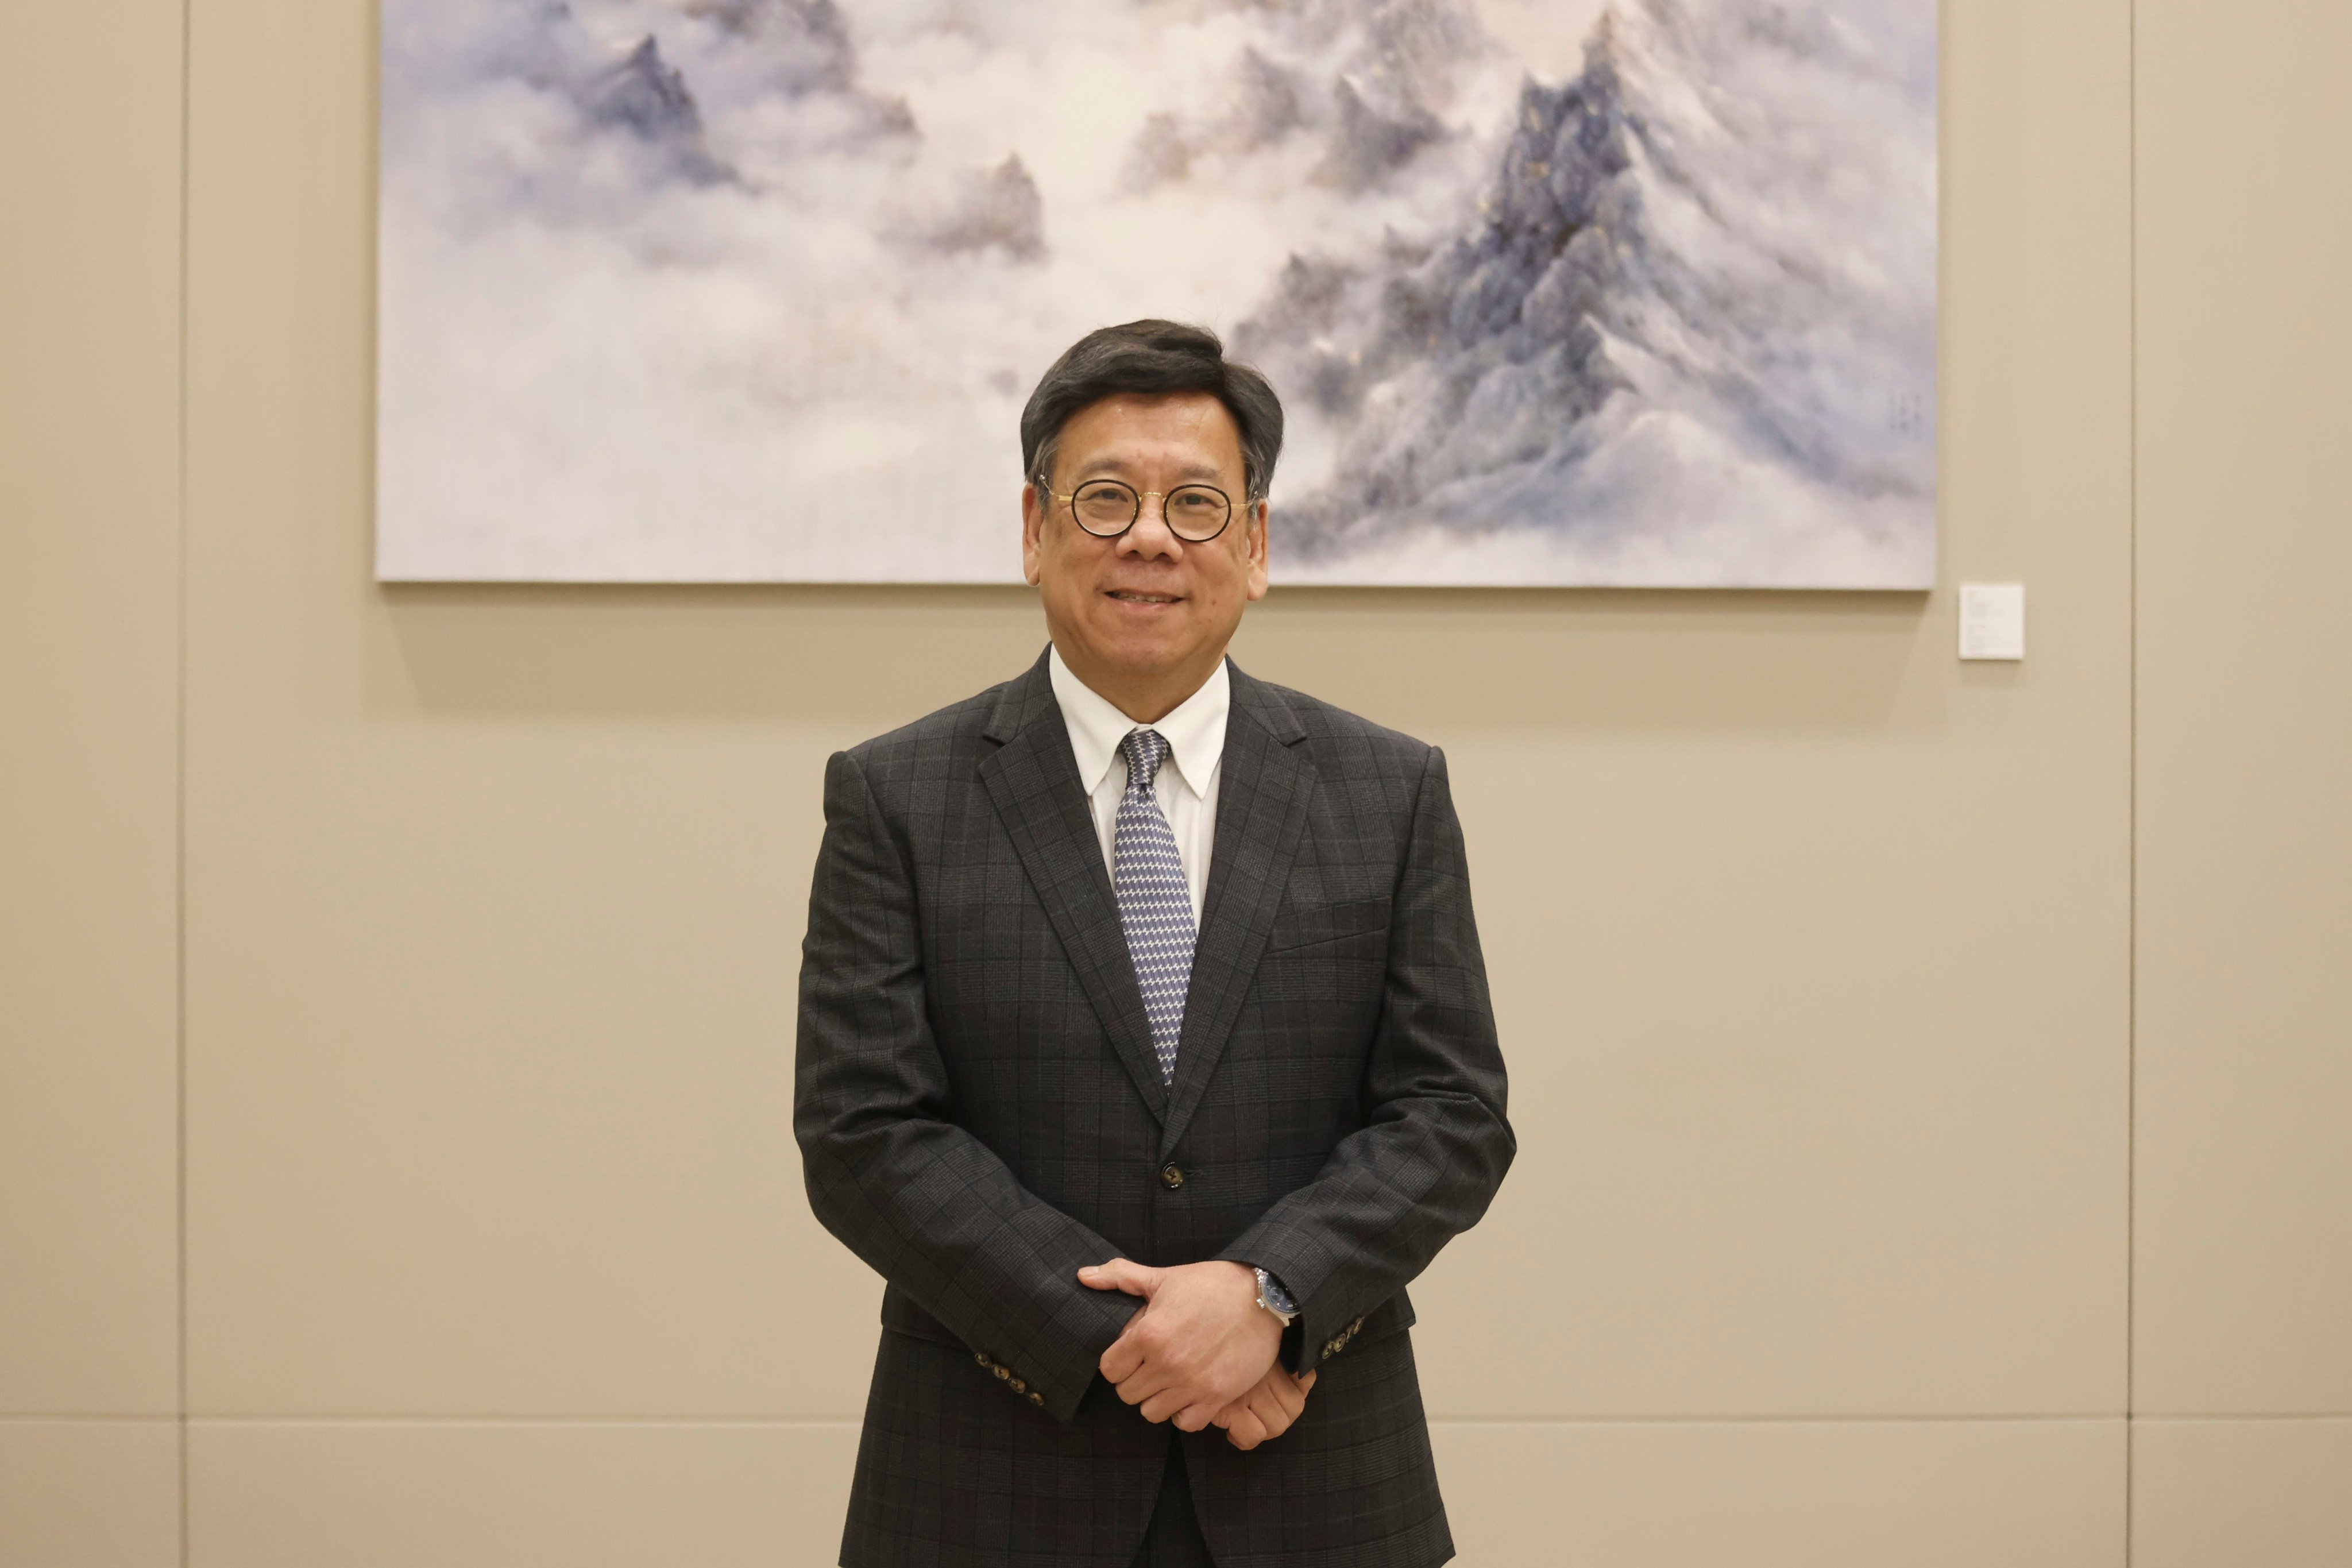 Commerce minister Algernon Yau says he will promote the city to his Western counterparts at the coming Apec ministerial meeting. Photo: Jonathan Wong